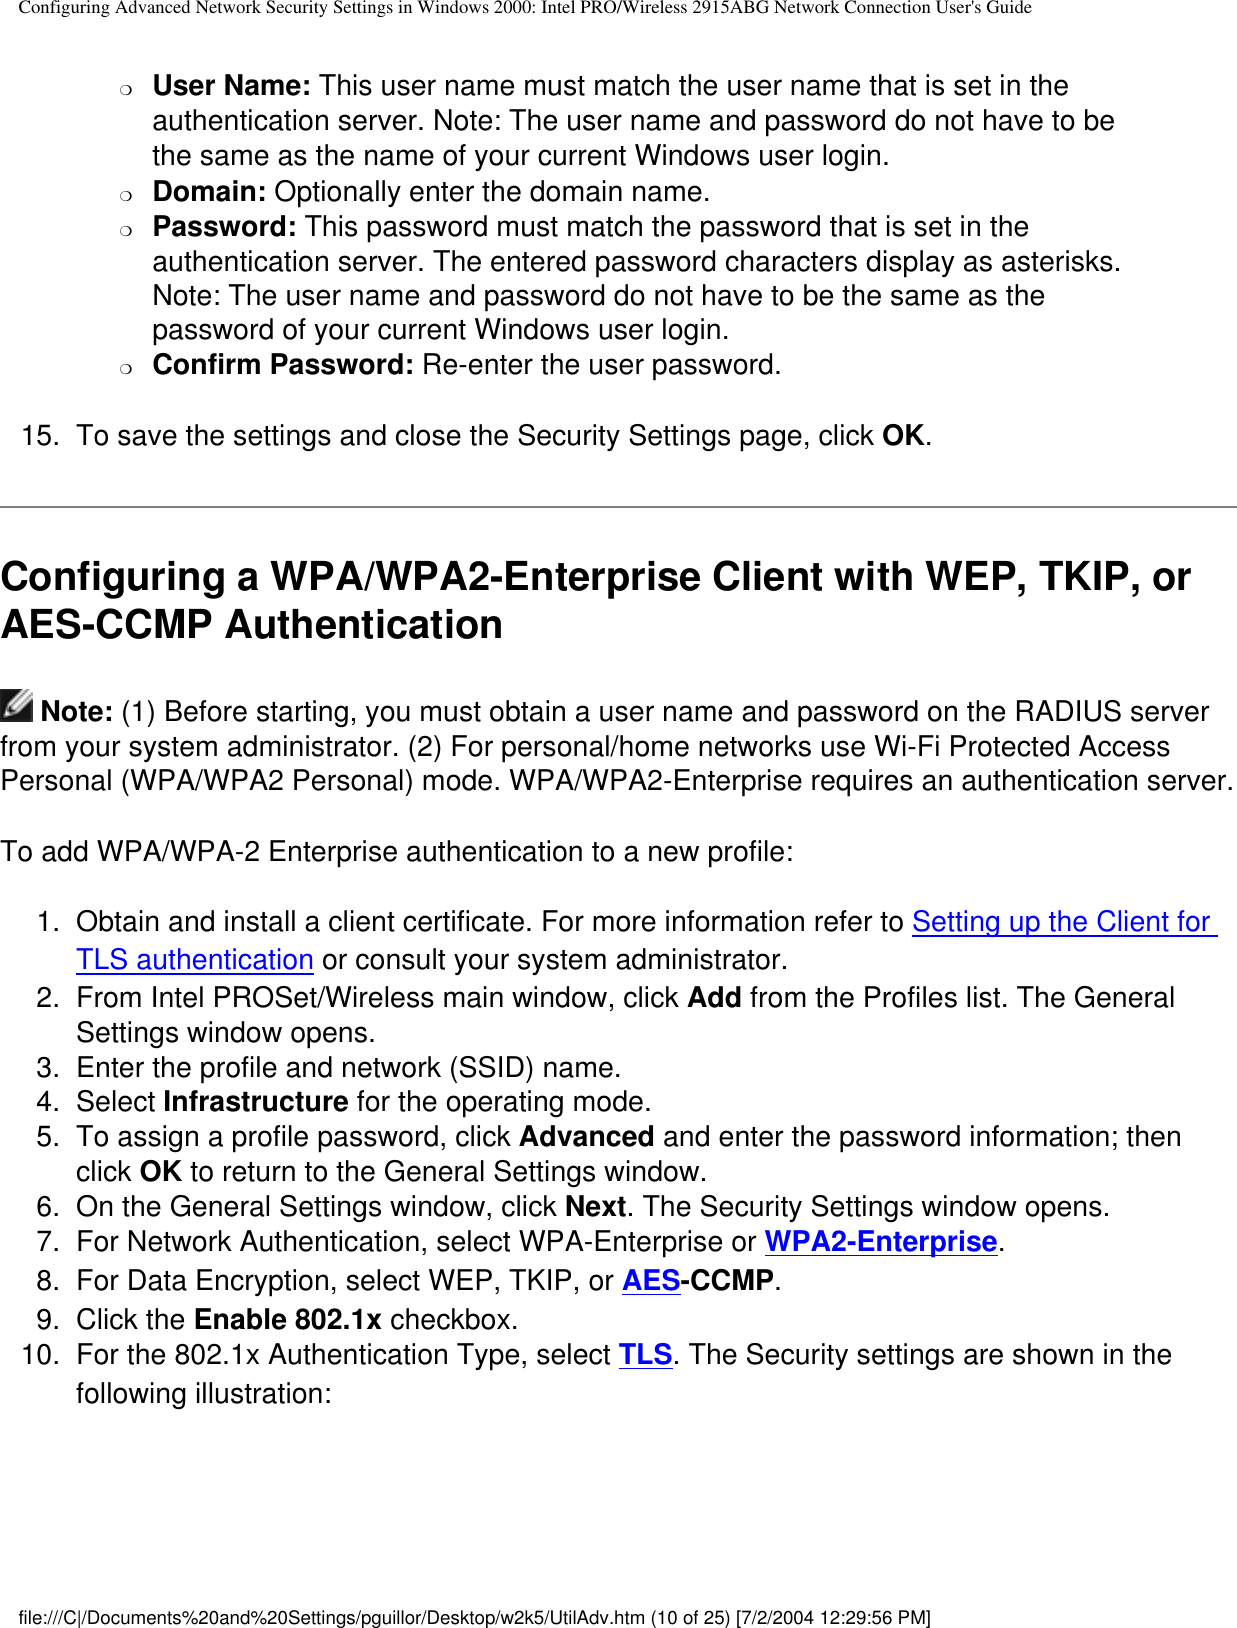 Configuring Advanced Network Security Settings in Windows 2000: Intel PRO/Wireless 2915ABG Network Connection User&apos;s Guide❍     User Name: This user name must match the user name that is set in the authentication server. Note: The user name and password do not have to be the same as the name of your current Windows user login. ❍     Domain: Optionally enter the domain name.❍     Password: This password must match the password that is set in the authentication server. The entered password characters display as asterisks. Note: The user name and password do not have to be the same as the password of your current Windows user login. ❍     Confirm Password: Re-enter the user password.15.  To save the settings and close the Security Settings page, click OK. Configuring a WPA/WPA2-Enterprise Client with WEP, TKIP, or AES-CCMP Authentication Note: (1) Before starting, you must obtain a user name and password on the RADIUS server from your system administrator. (2) For personal/home networks use Wi-Fi Protected Access Personal (WPA/WPA2 Personal) mode. WPA/WPA2-Enterprise requires an authentication server.To add WPA/WPA-2 Enterprise authentication to a new profile: 1.  Obtain and install a client certificate. For more information refer to Setting up the Client for TLS authentication or consult your system administrator. 2.  From Intel PROSet/Wireless main window, click Add from the Profiles list. The General Settings window opens.3.  Enter the profile and network (SSID) name.4.  Select Infrastructure for the operating mode.5.  To assign a profile password, click Advanced and enter the password information; then click OK to return to the General Settings window.  6.  On the General Settings window, click Next. The Security Settings window opens.7.  For Network Authentication, select WPA-Enterprise or WPA2-Enterprise.8.  For Data Encryption, select WEP, TKIP, or AES-CCMP. 9.  Click the Enable 802.1x checkbox.10.  For the 802.1x Authentication Type, select TLS. The Security settings are shown in the following illustration:            file:///C|/Documents%20and%20Settings/pguillor/Desktop/w2k5/UtilAdv.htm (10 of 25) [7/2/2004 12:29:56 PM]